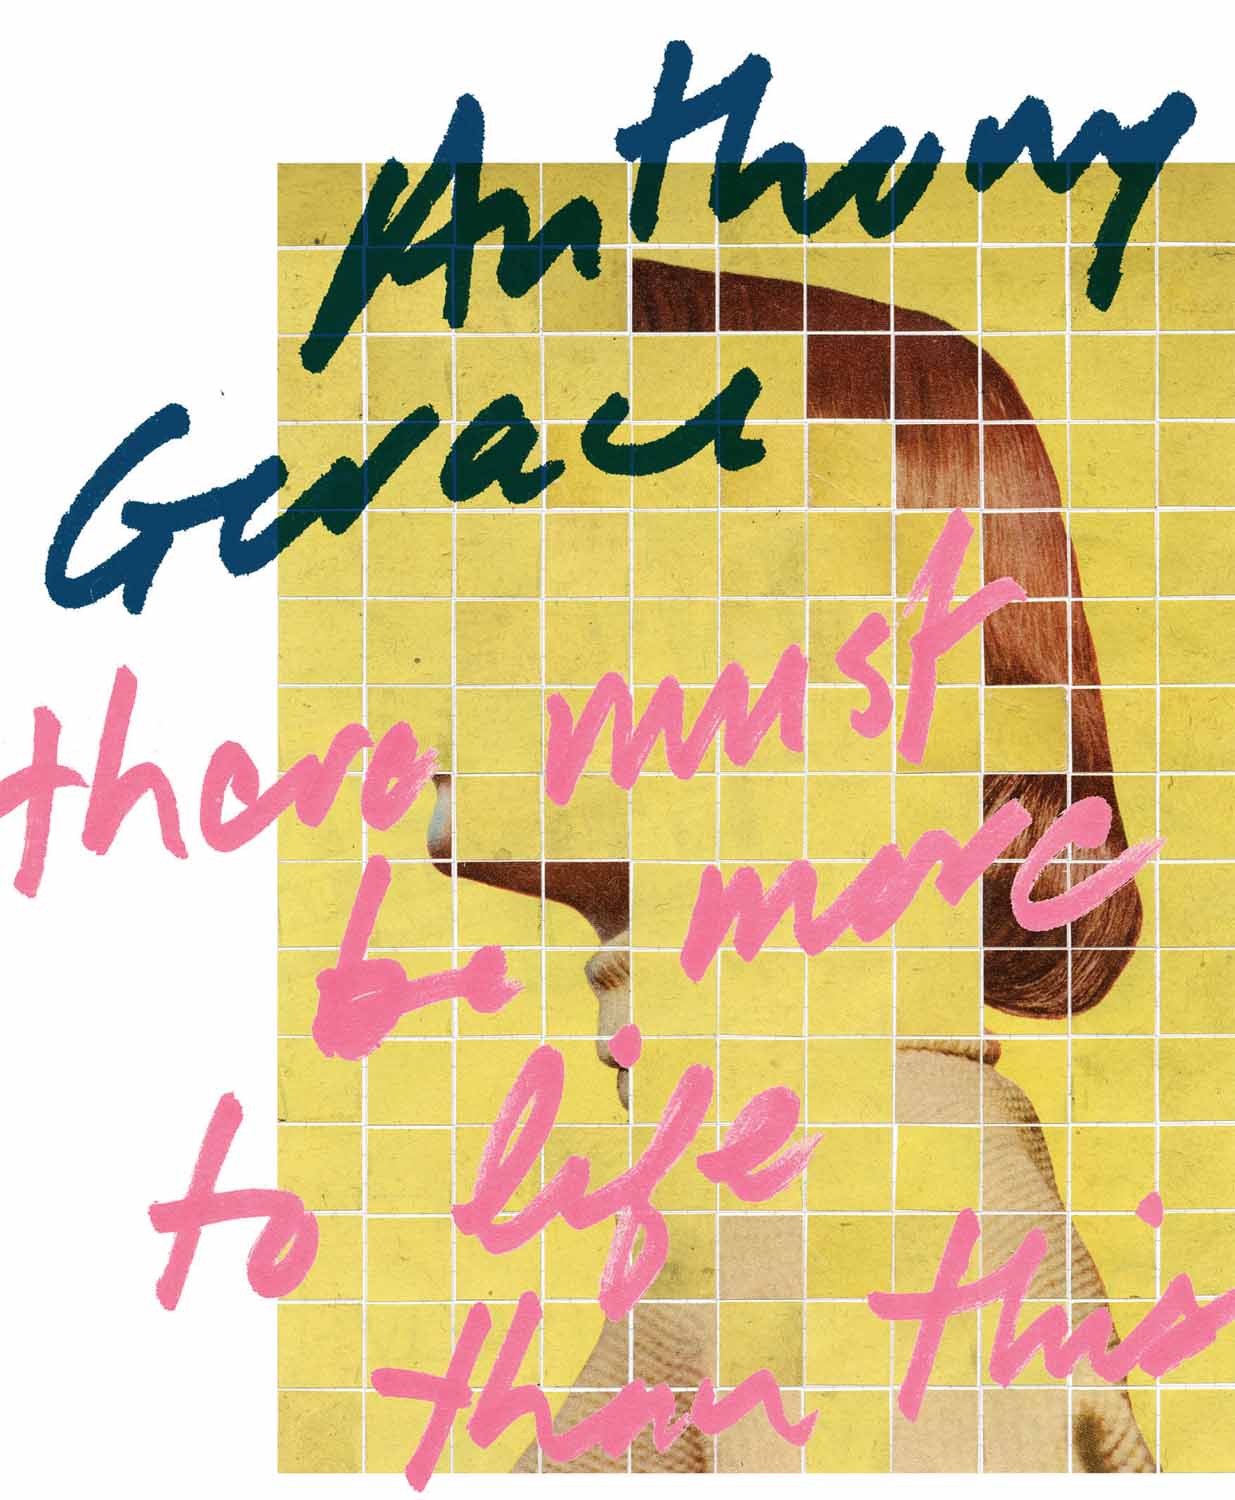 Anthony Gerace – There must be more to life than this